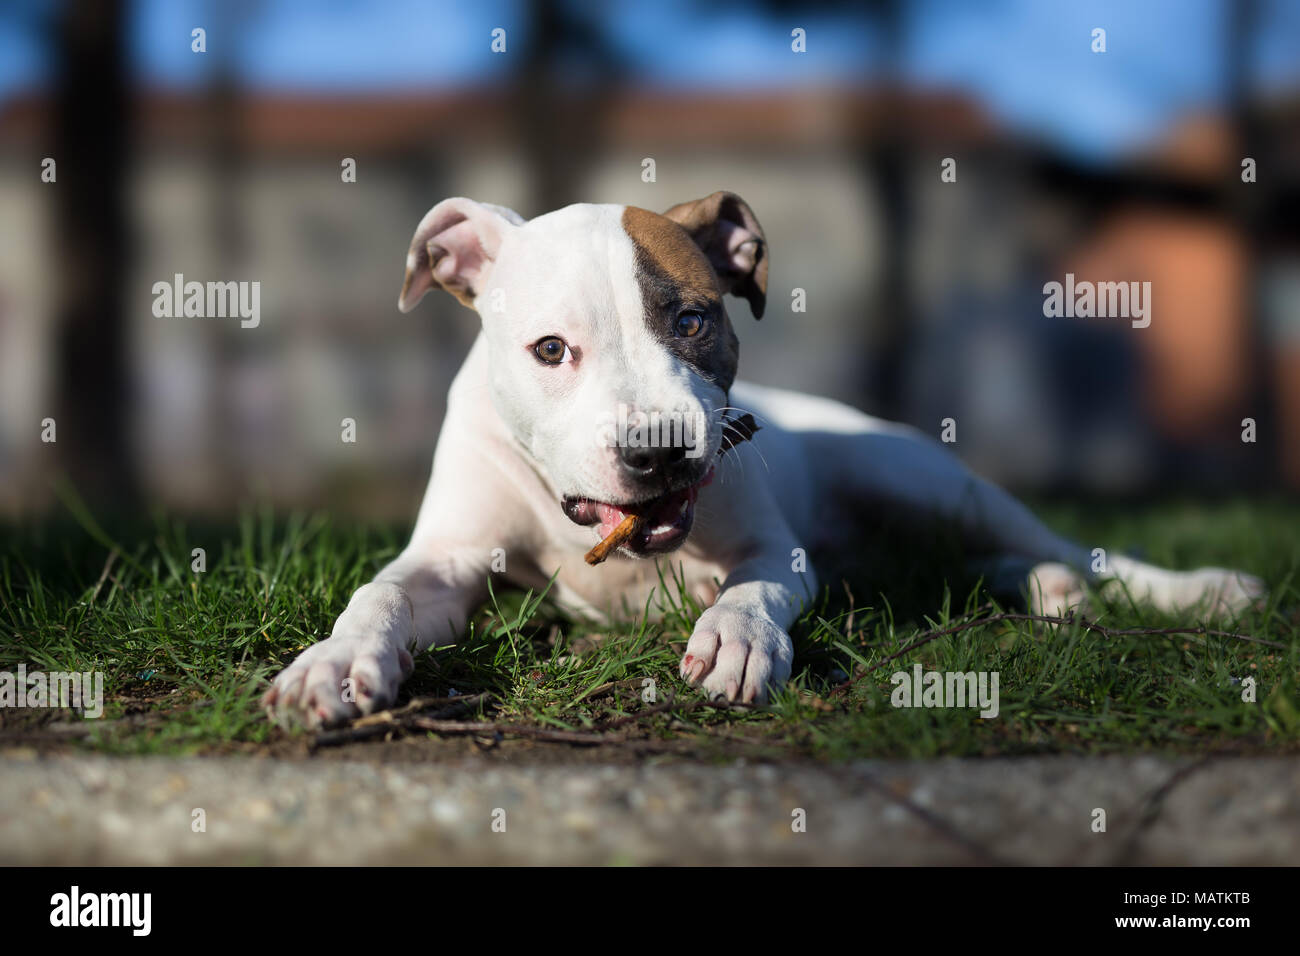 American Staffordshire terrier puppy chewing-stick Banque D'Images